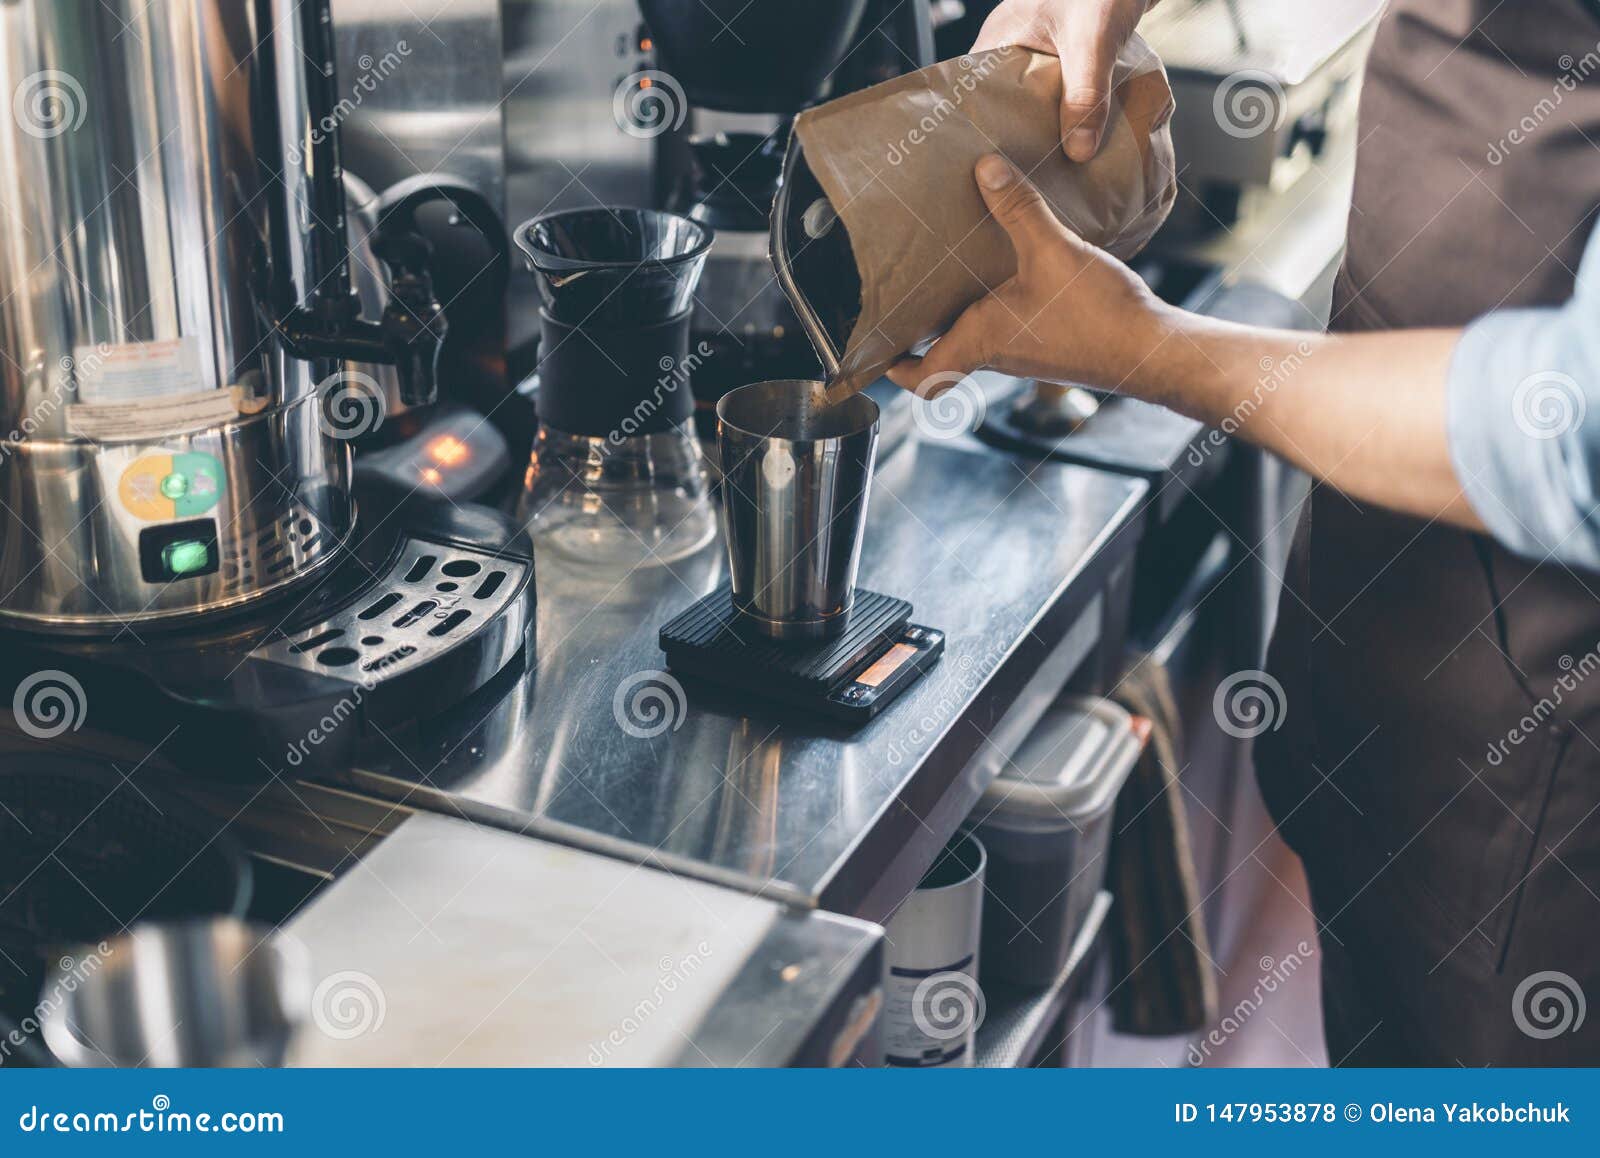 Hands of Barista Sifting Coffee from the Package Stock Photo - Image of  barista, worker: 147953878